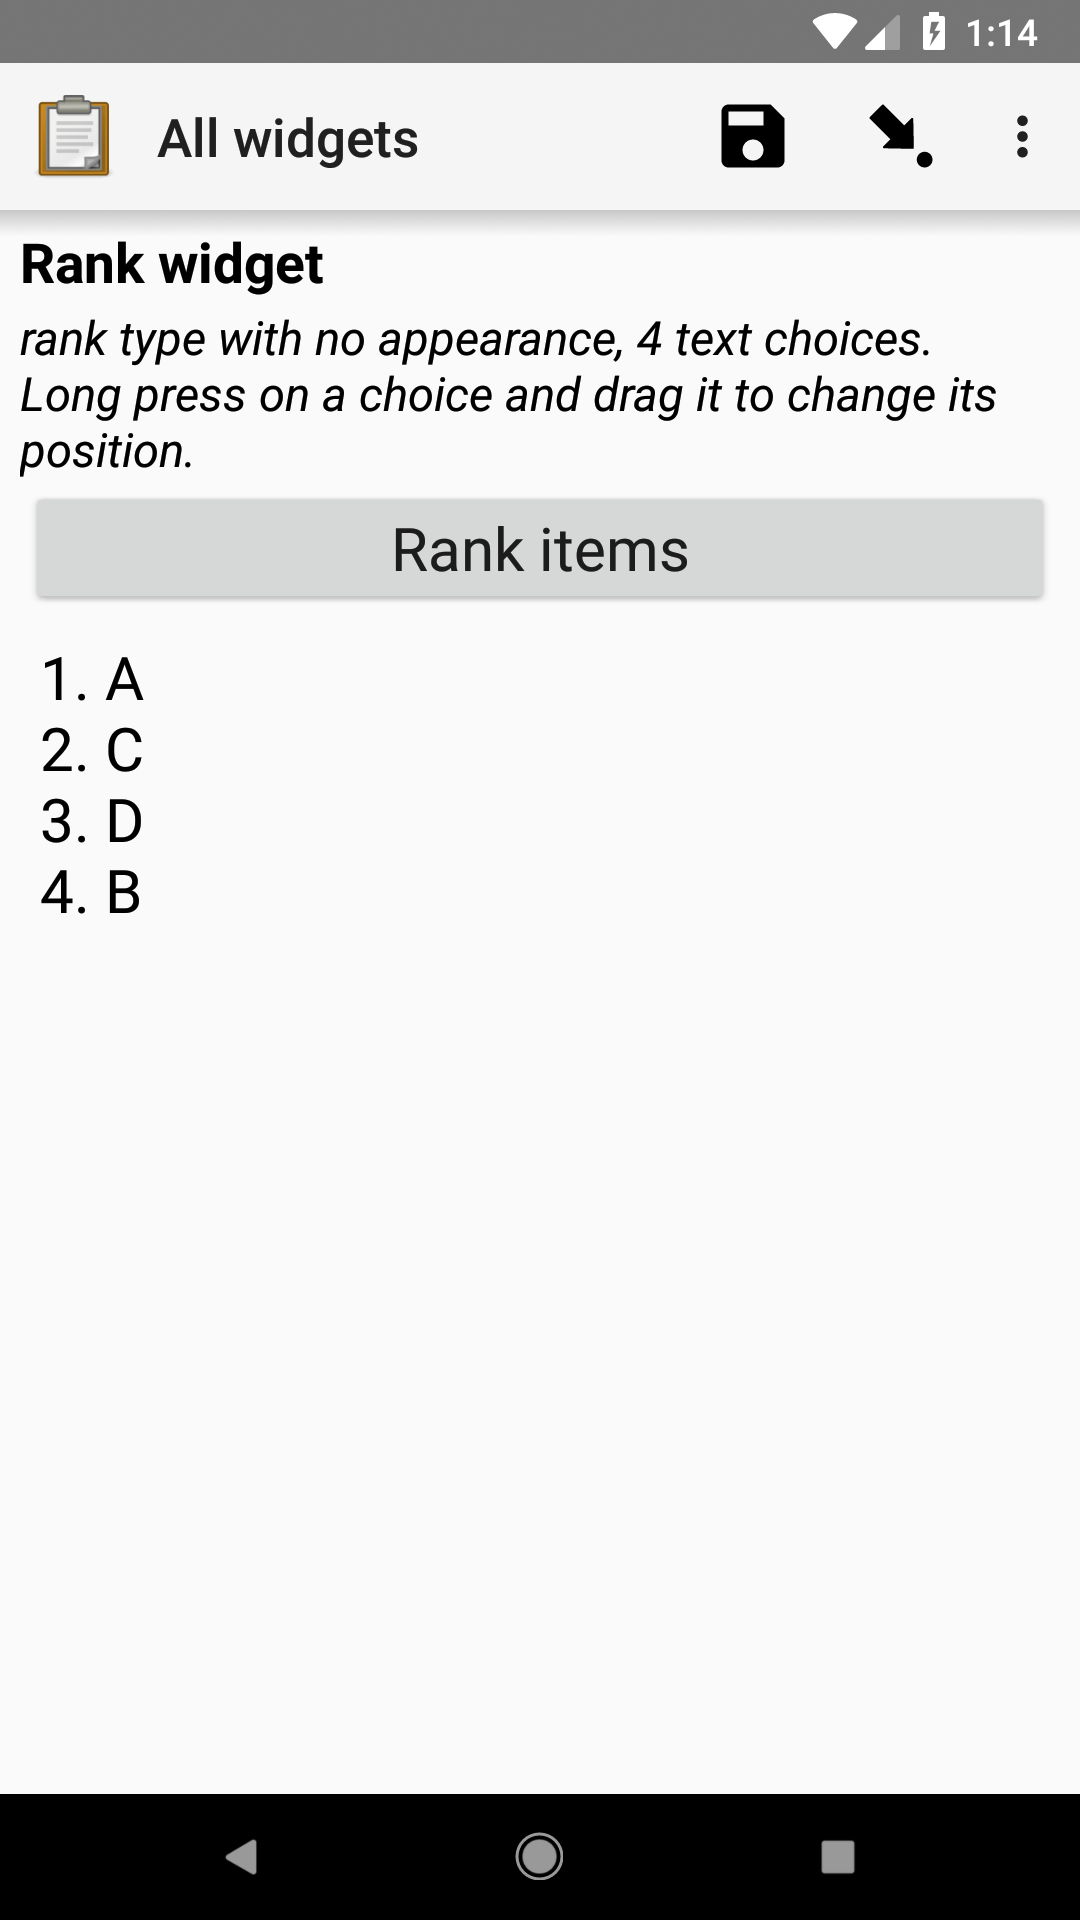 The rank widget, as displayed in the ODK Collect app on an Android phone. The question text is "Rank widget." The hint text is "rank type with no appearance, 4 text choices. Long press on a choice and drag it to change its position." Below that is a button with label "Rank items." Below the button is the current order of the options.